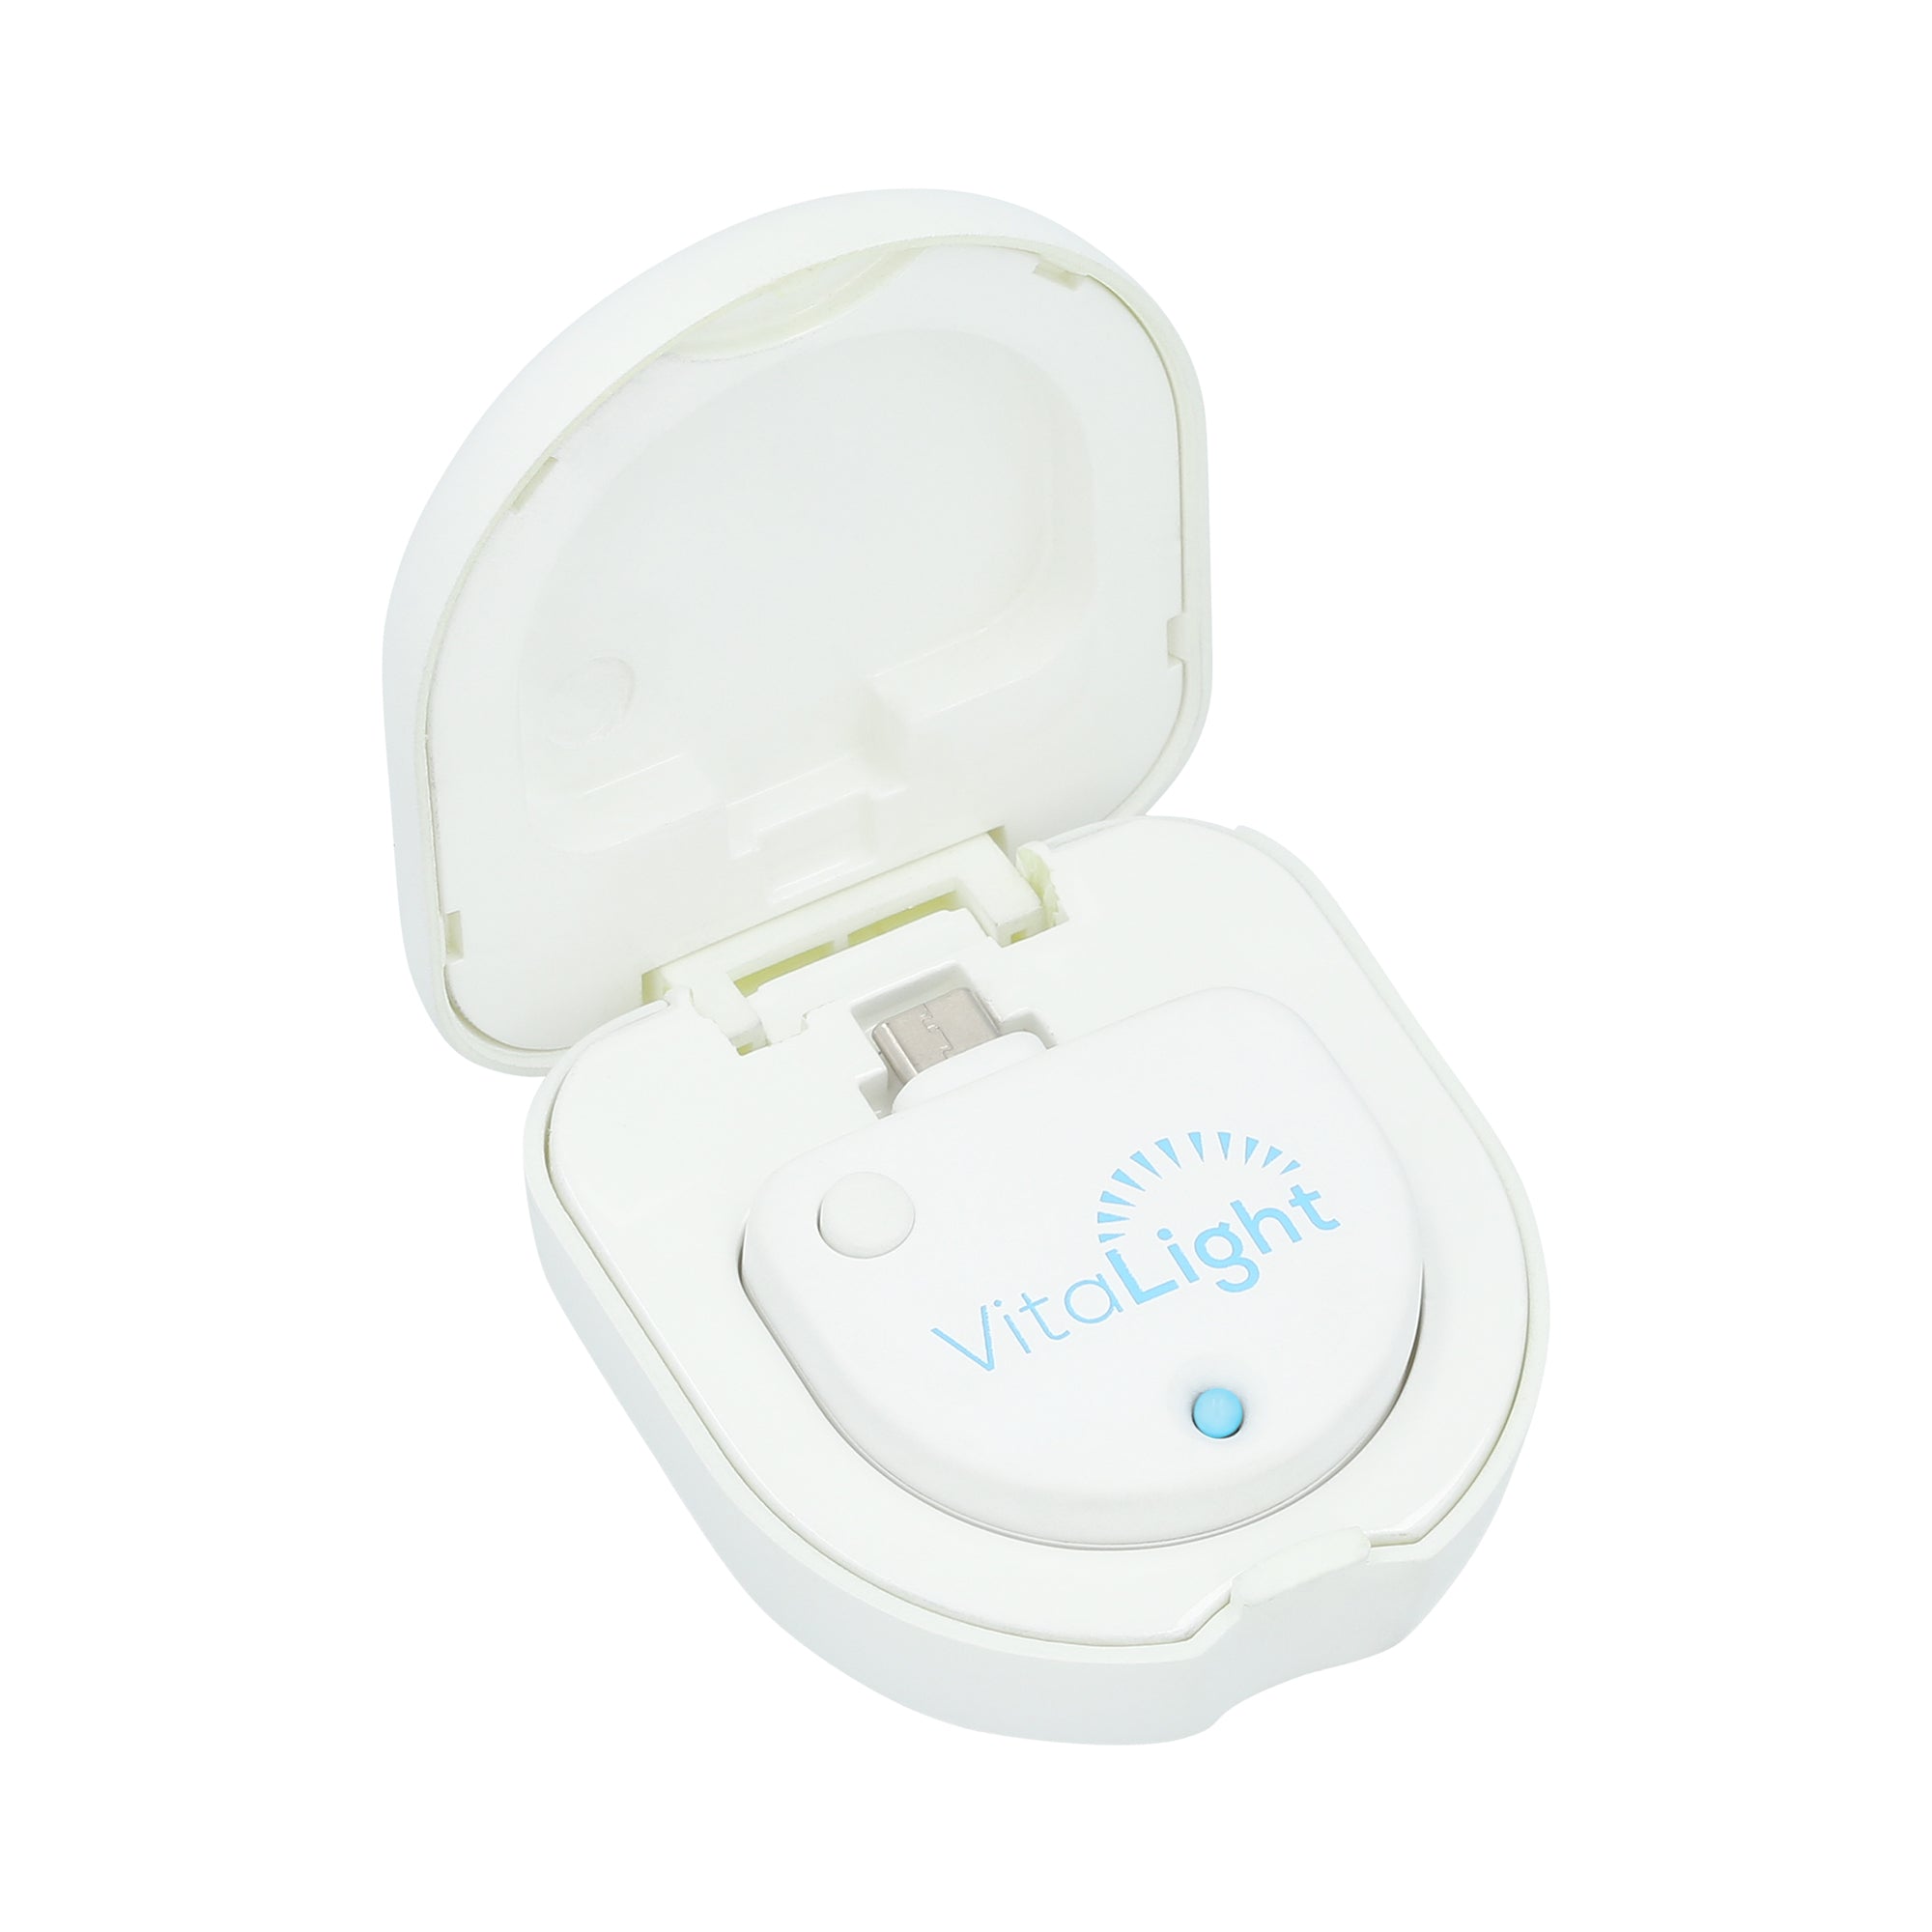 uv lamp in carrying case